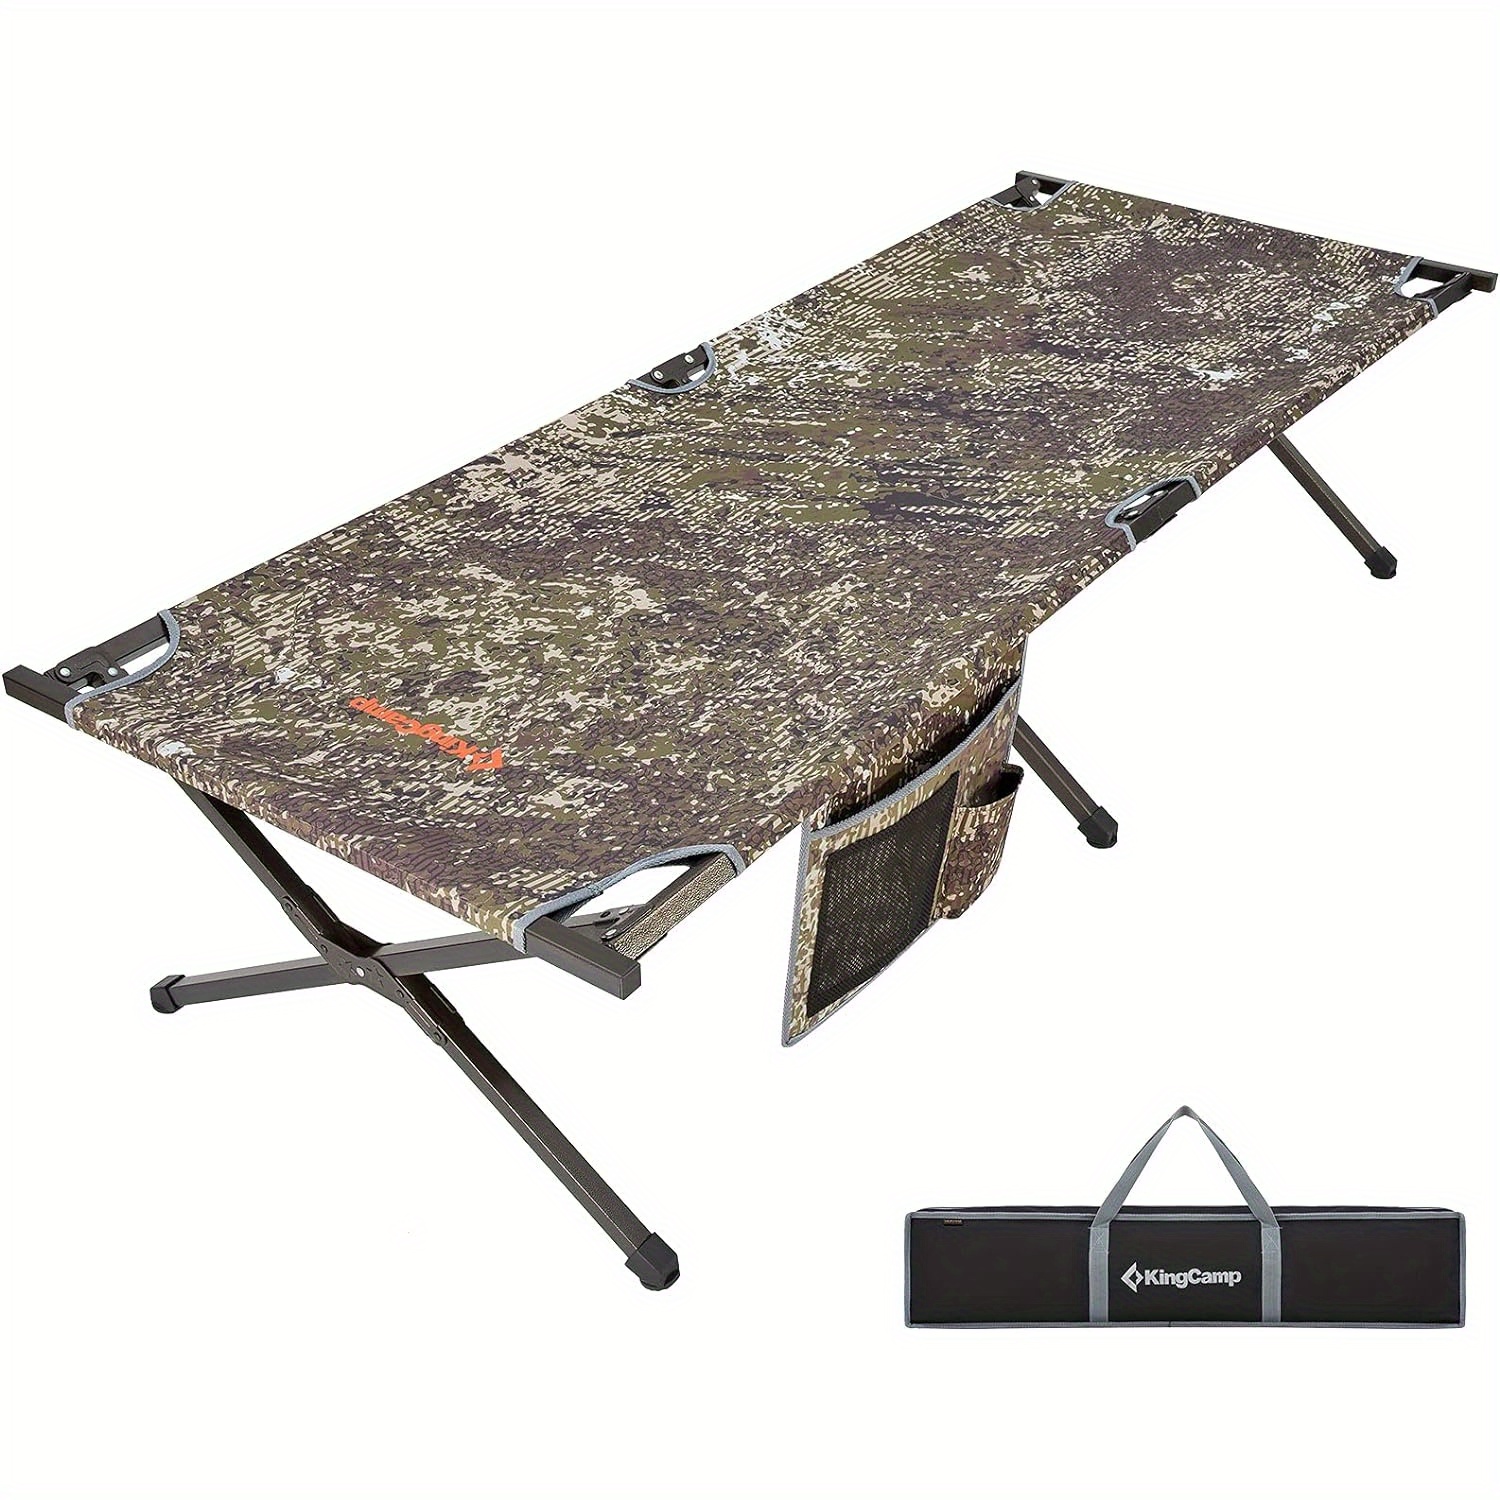 

Kingcamptrailhead Ii Camping Cot, Easy-to-assemble Folding Cot Supports Campers Up To 6ft 2in Or 300lbs, Great For Camping, Lounging, & Elevated Sleeping